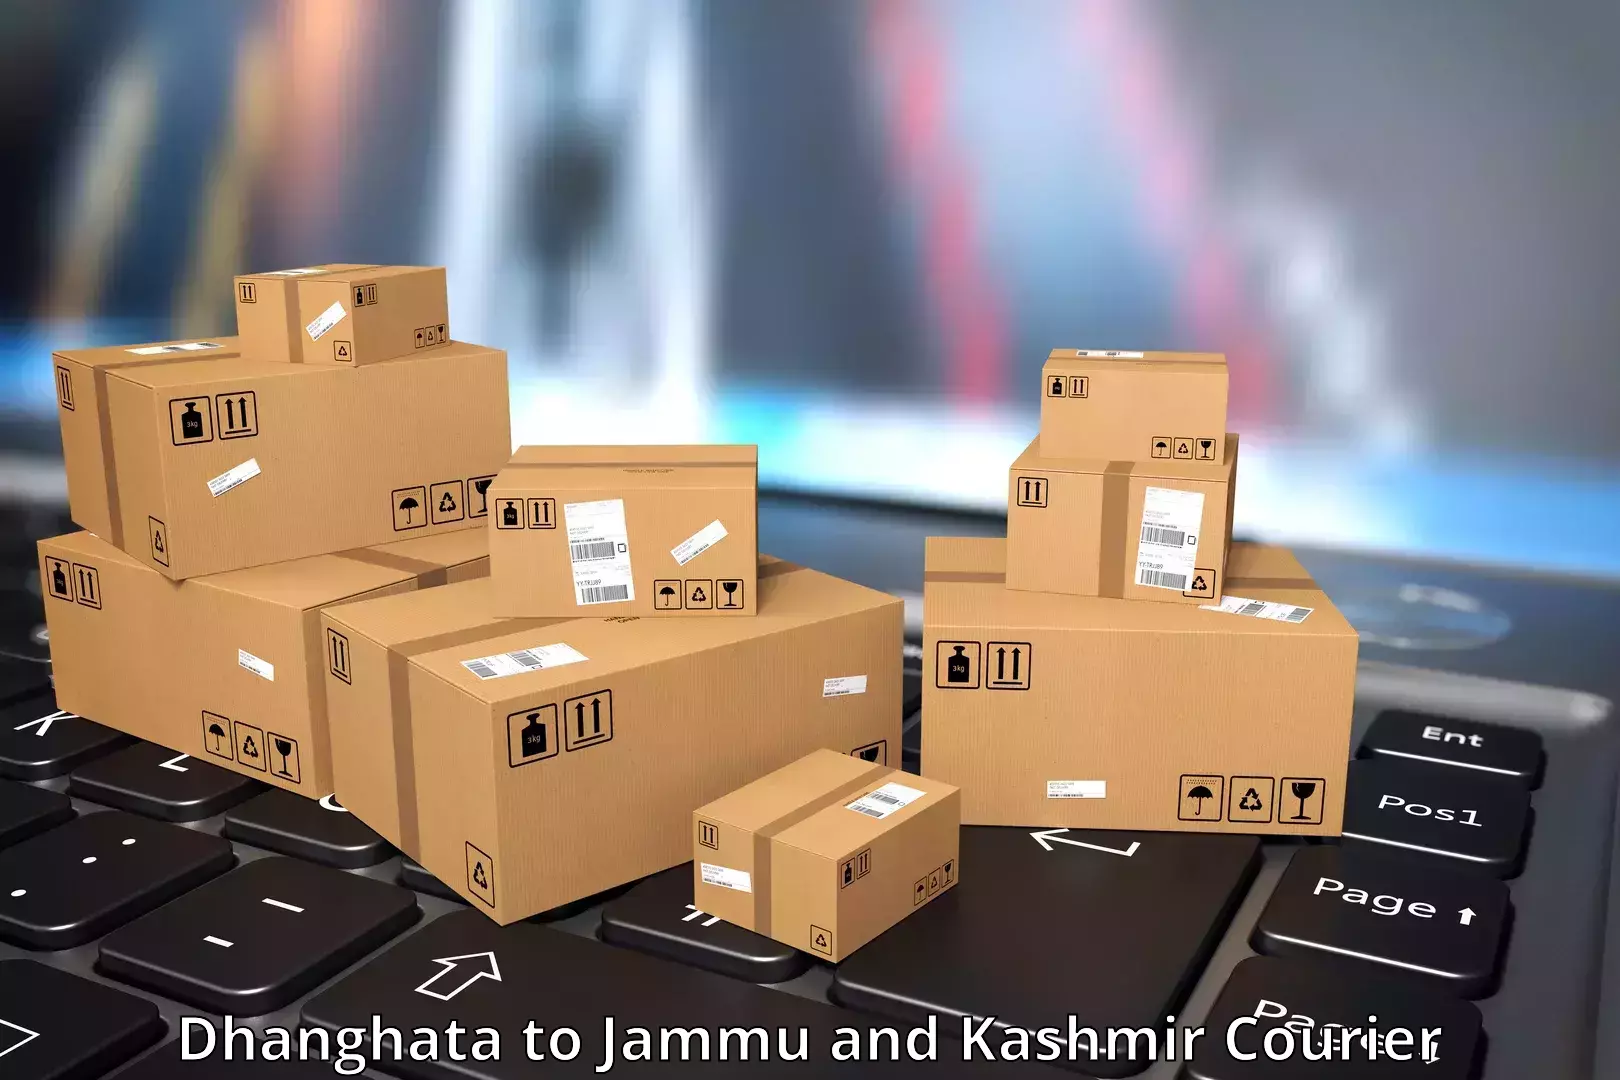 Courier service partnerships Dhanghata to Bhaderwah